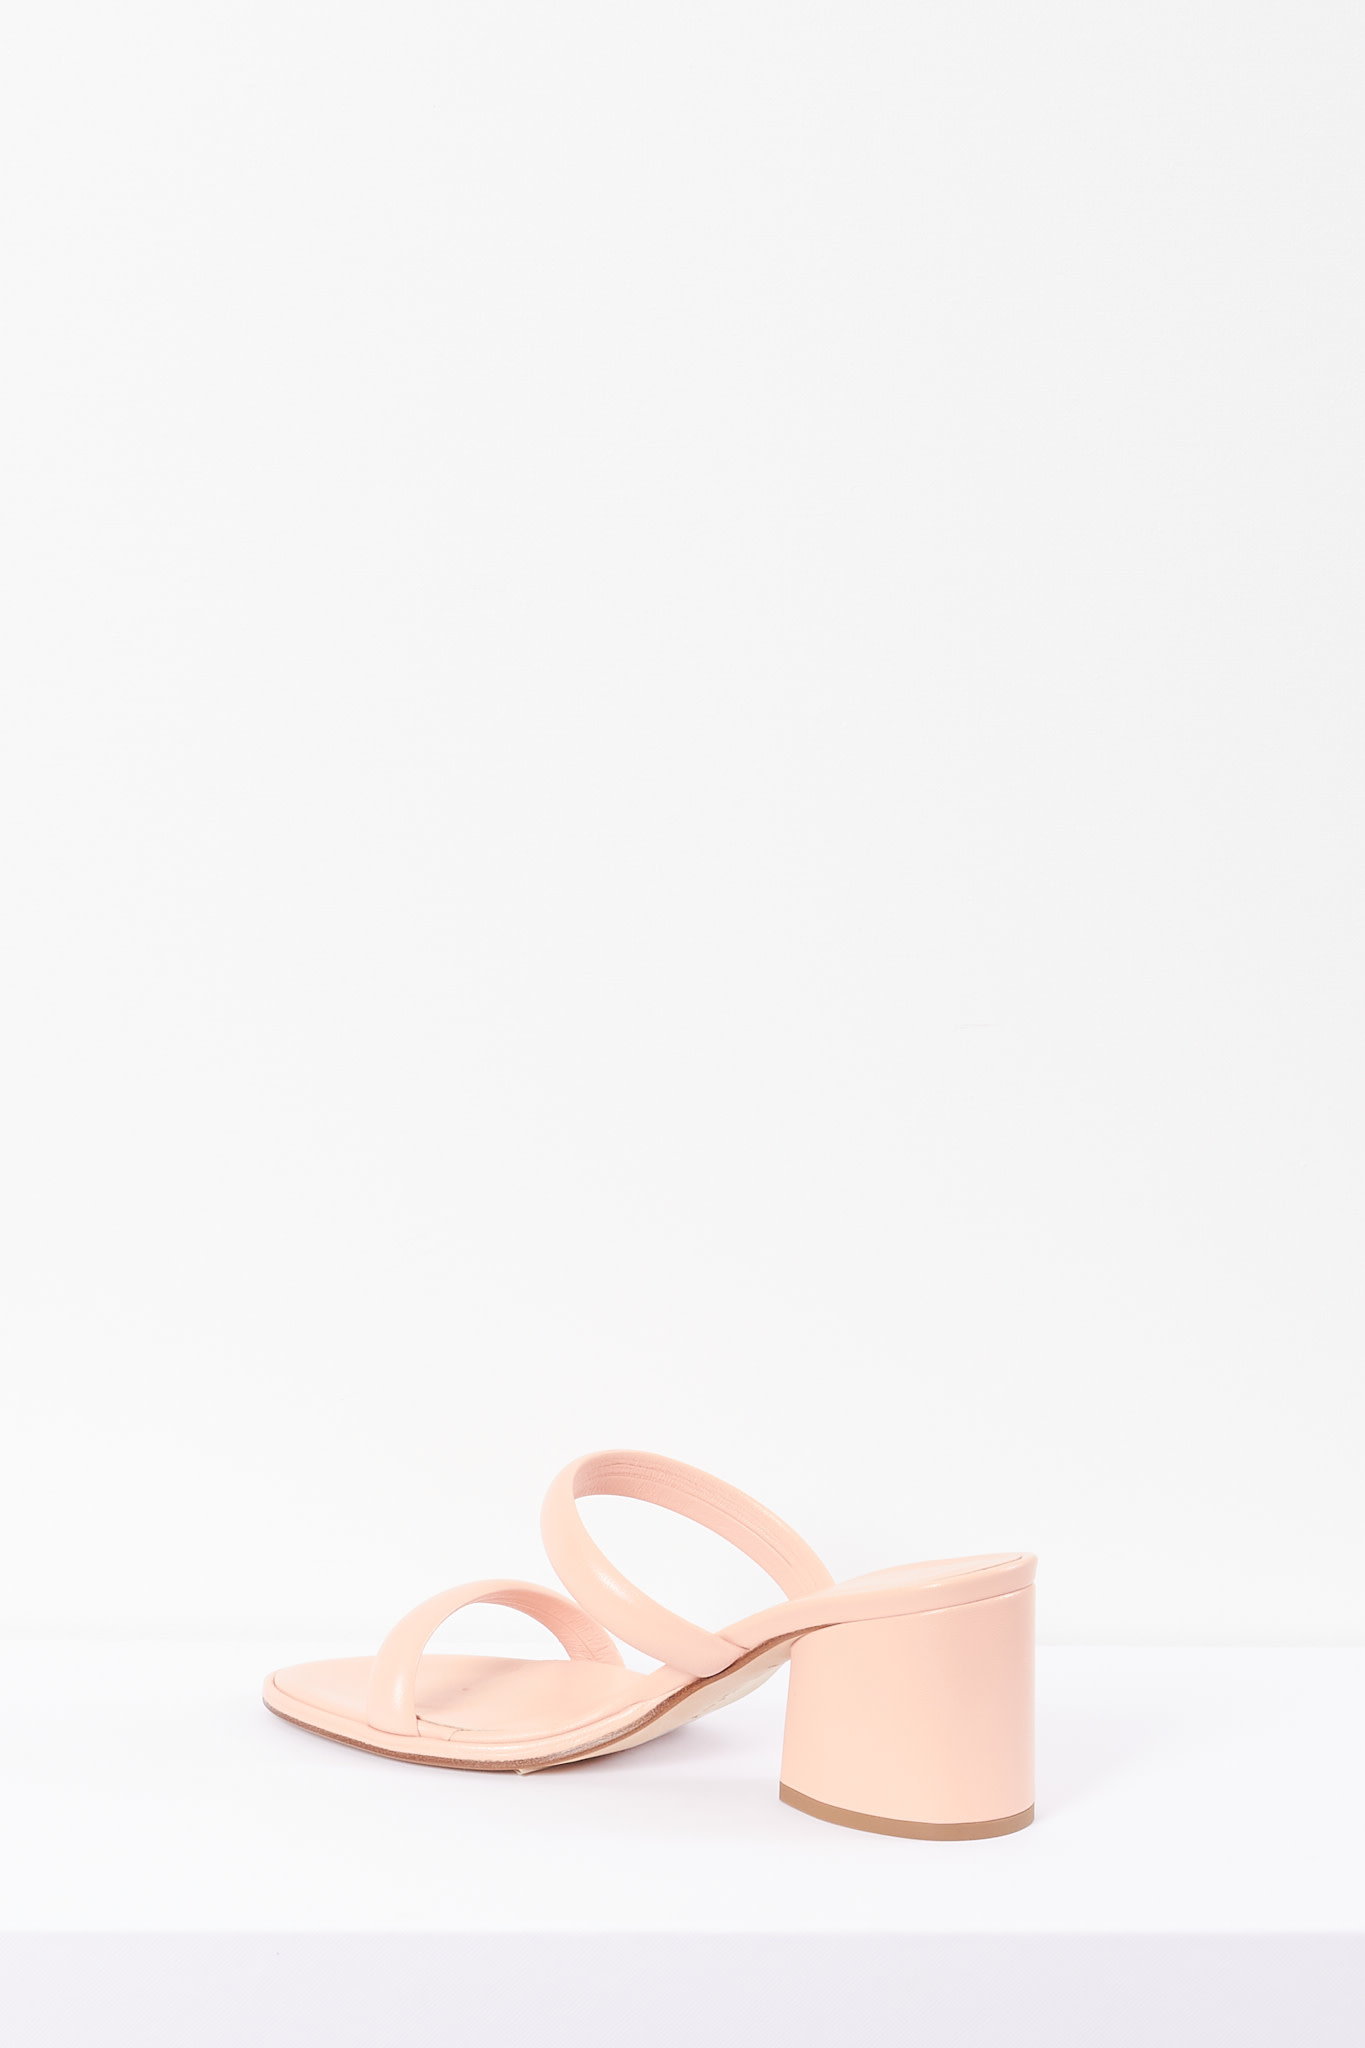 Aeyde - Barbara leather sandals